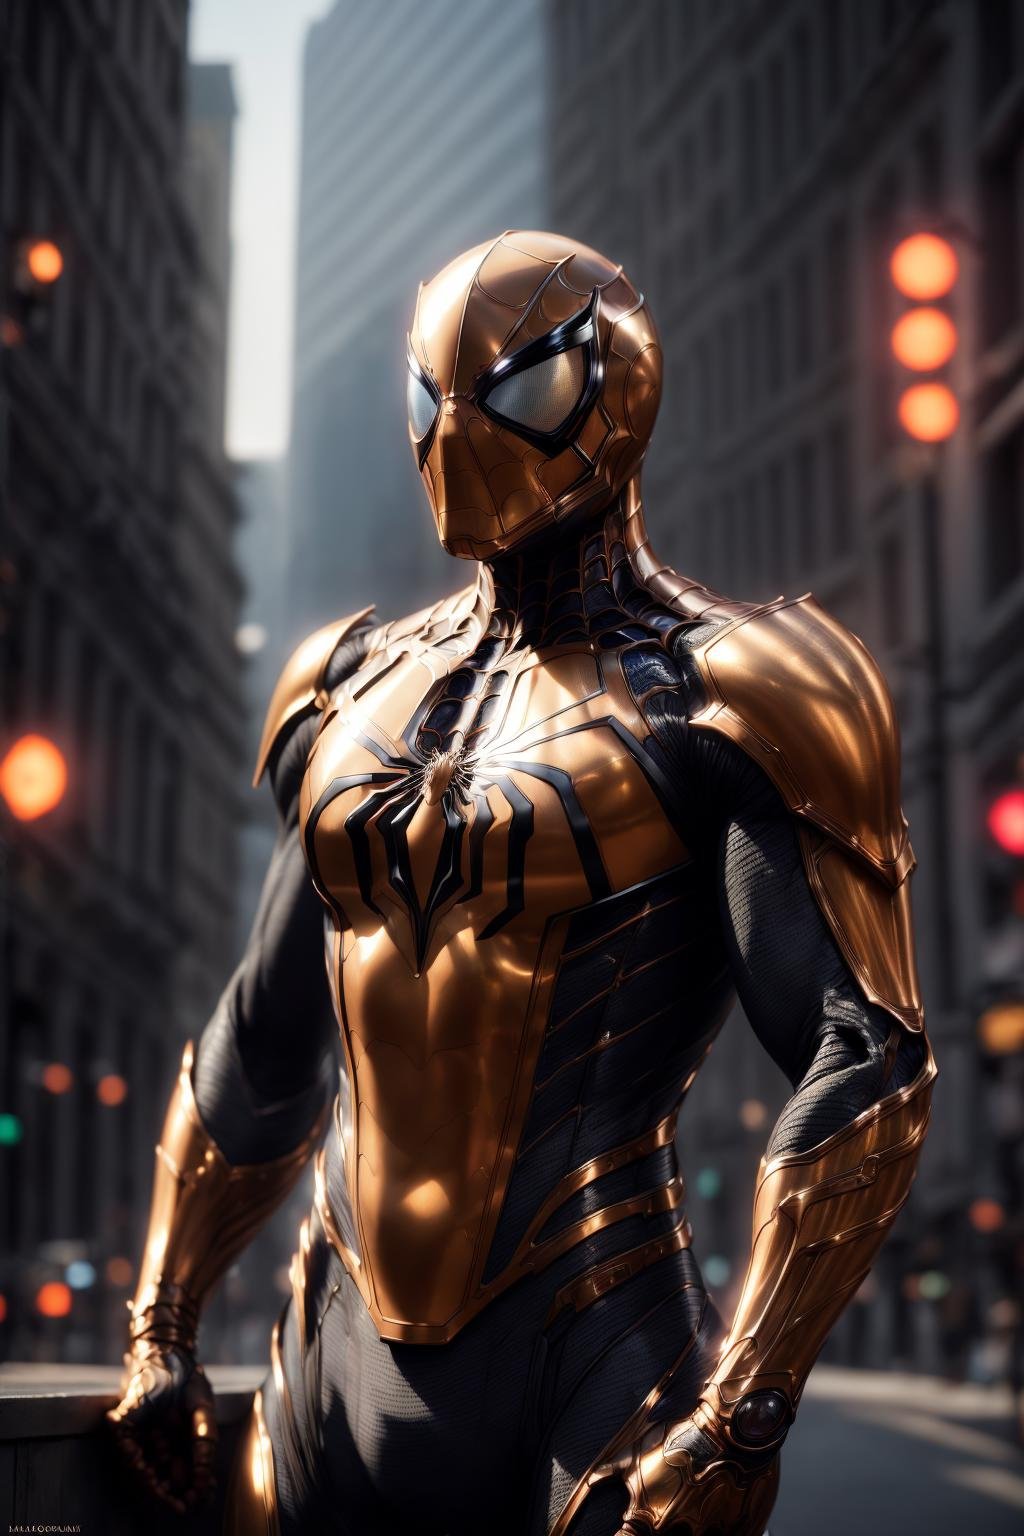 <lora:armored_spiderverse_v1:0.8> masterpiece, best quality, intricate details, highly detailed raw photography, photorealism, photorealistic, soft focus, volumetric lighting, volumetric shadows, cinematic light, large-scale, 8k-perfect-arnold1boy, armspiderverse,  ((__color__ armored bodysuit)), glowing eyes, helmet, spider web print, ((((__posture_poses__)))) <lora:more_details:0.6>((__subject-scifi__ background__)) <lora:epi_noiseoffset2:0.7>  